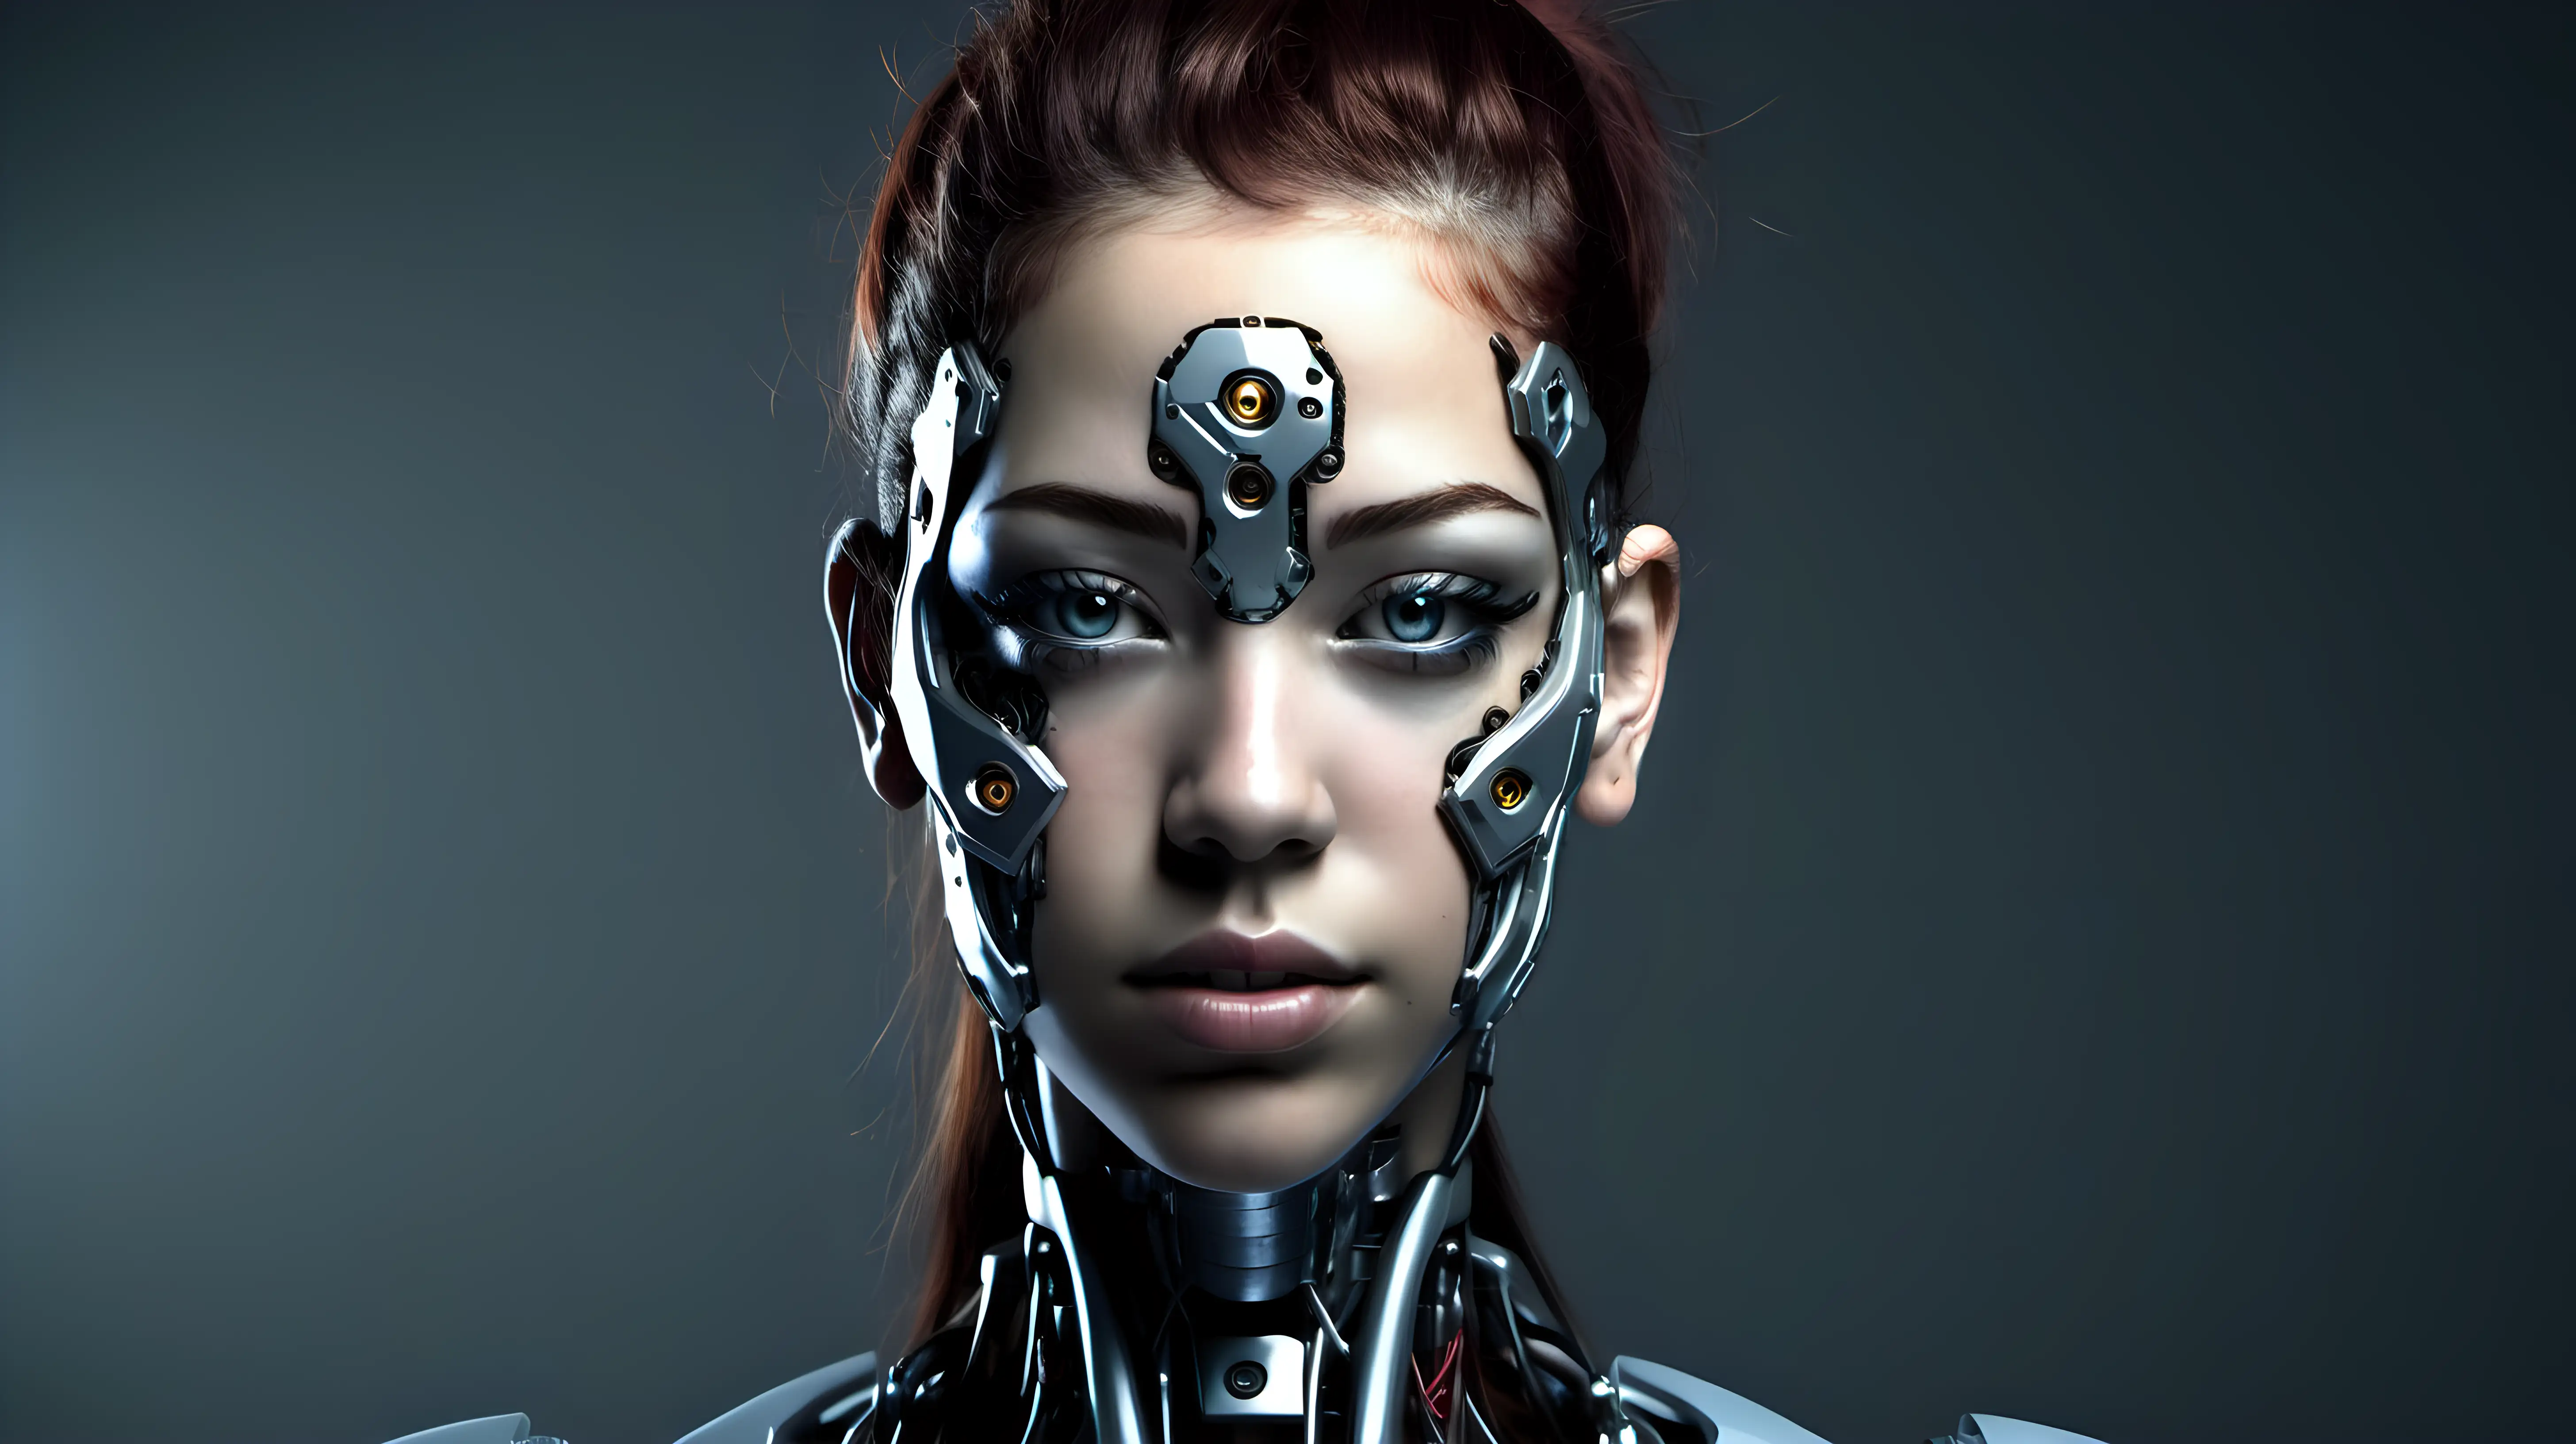 Beautiful 18YearOld Cyborg Woman with Striking Cybernetic Features